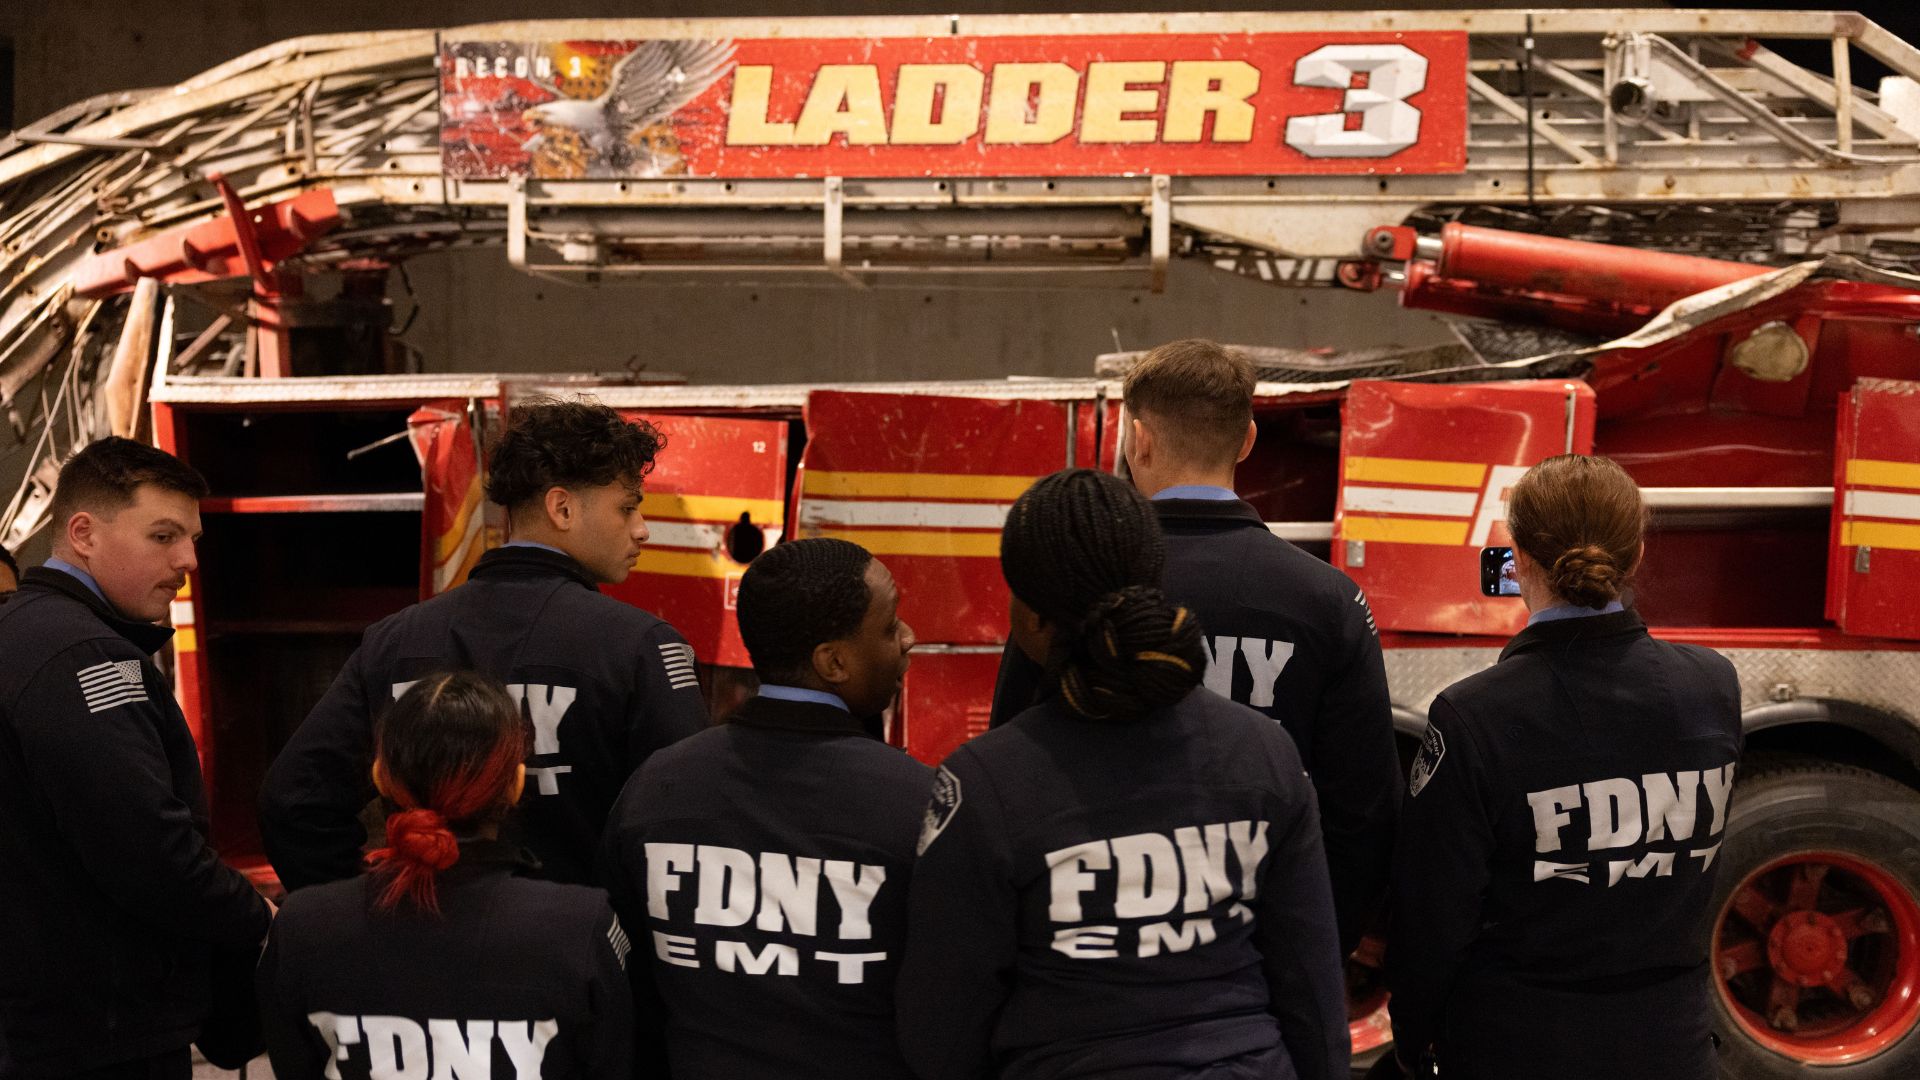 A group of men and woman wearing navy blue jackets that say FDNY EMT on them in white look at the mangled Ladder 3 fire truck